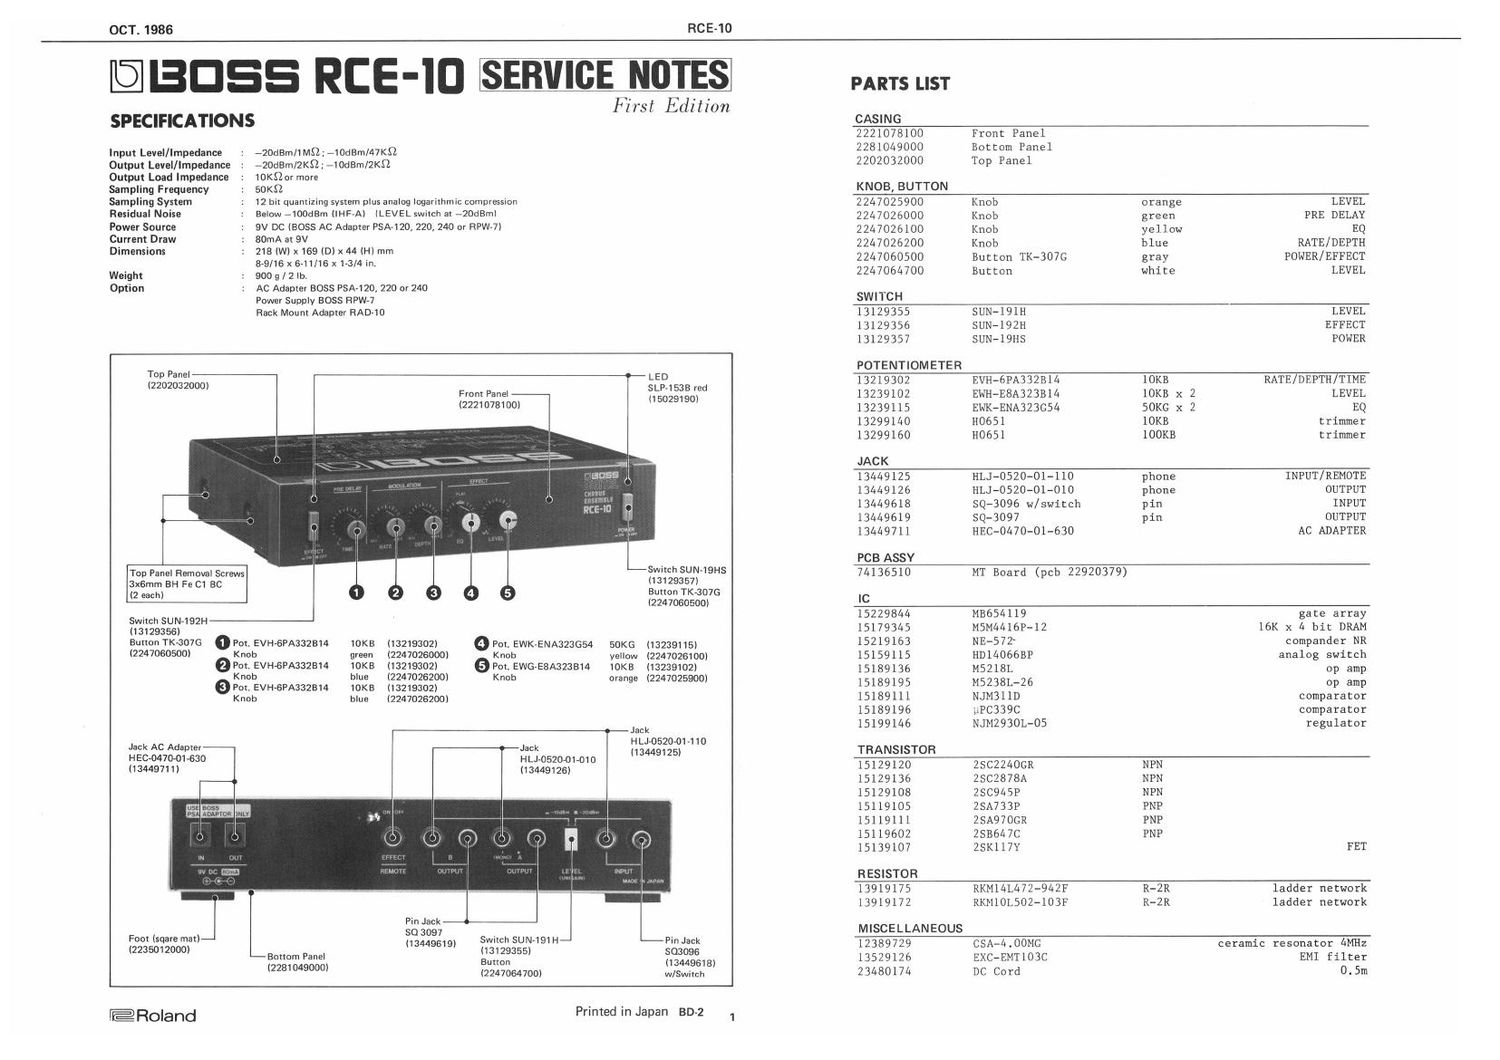 BOSS RCE 10 SERVICE NOTES